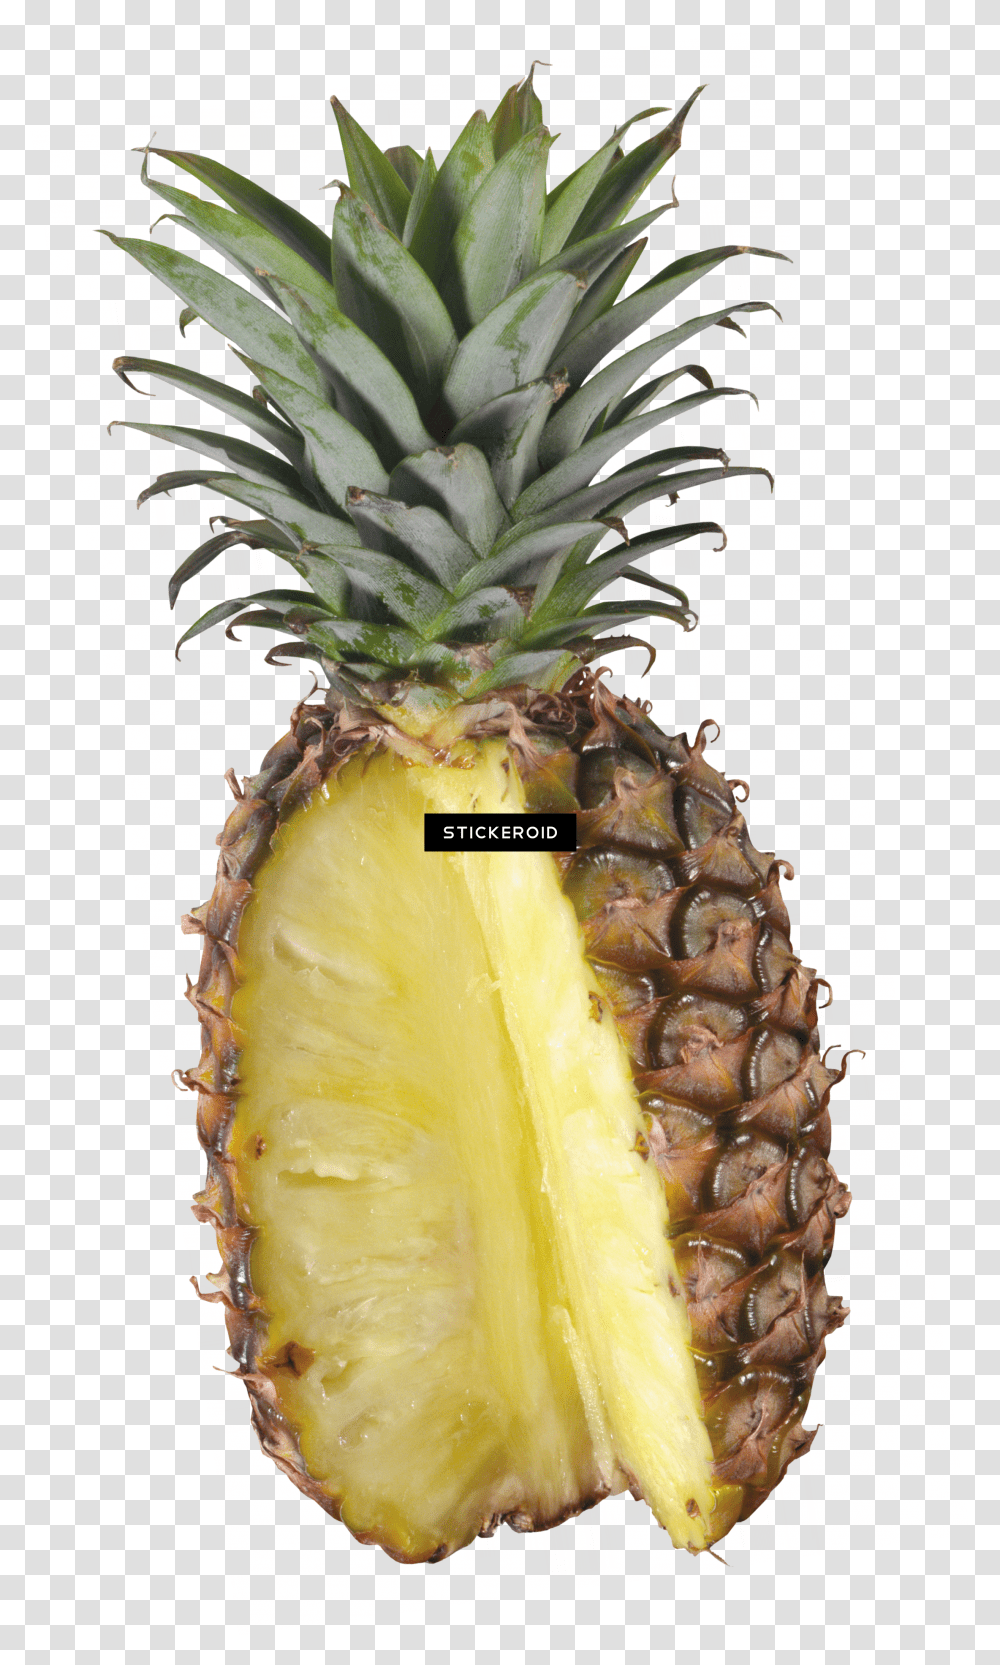 Download Pineapple Fruit Pineapple Image With No Pineapple Transparent Png